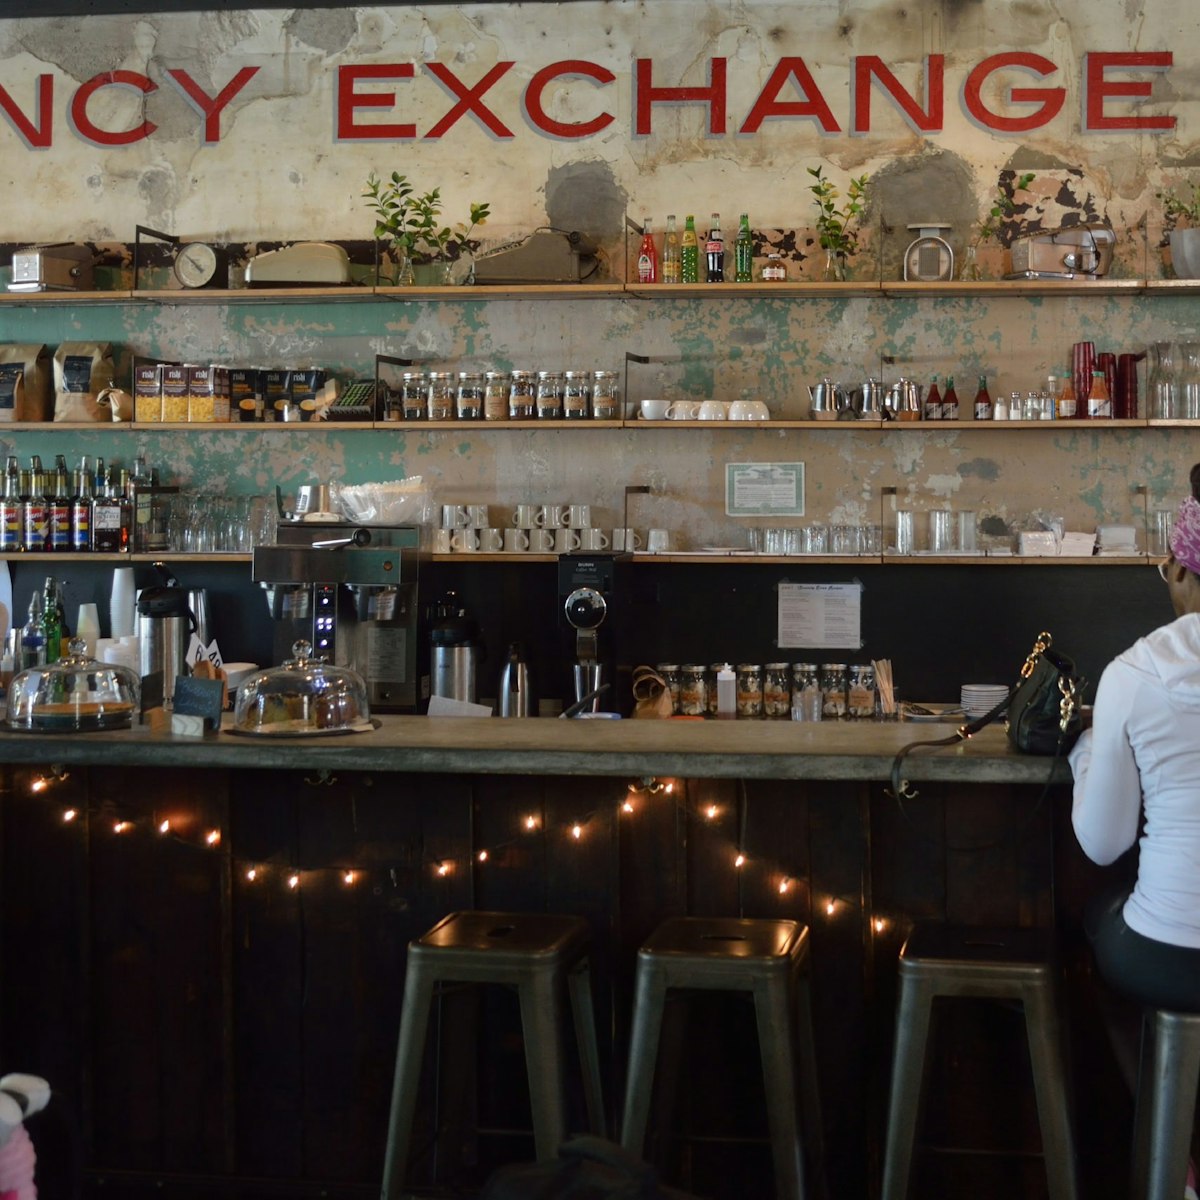 An actual defunct currency exchange is the setting for Washington Park's Currency Exchange Café